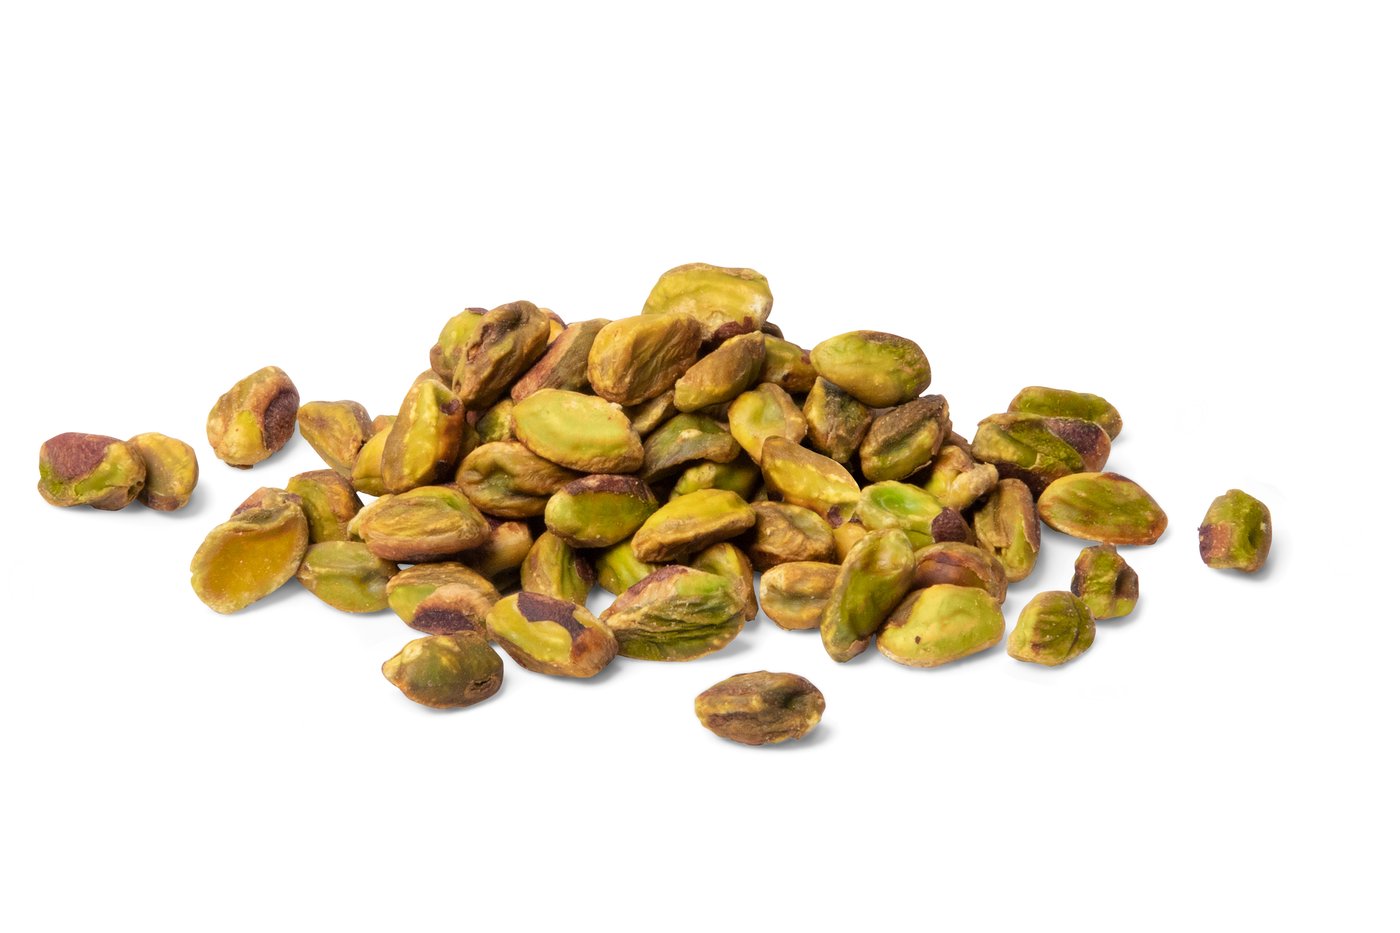 Roasted Pistachios (Unsalted, No Shell) image zoom